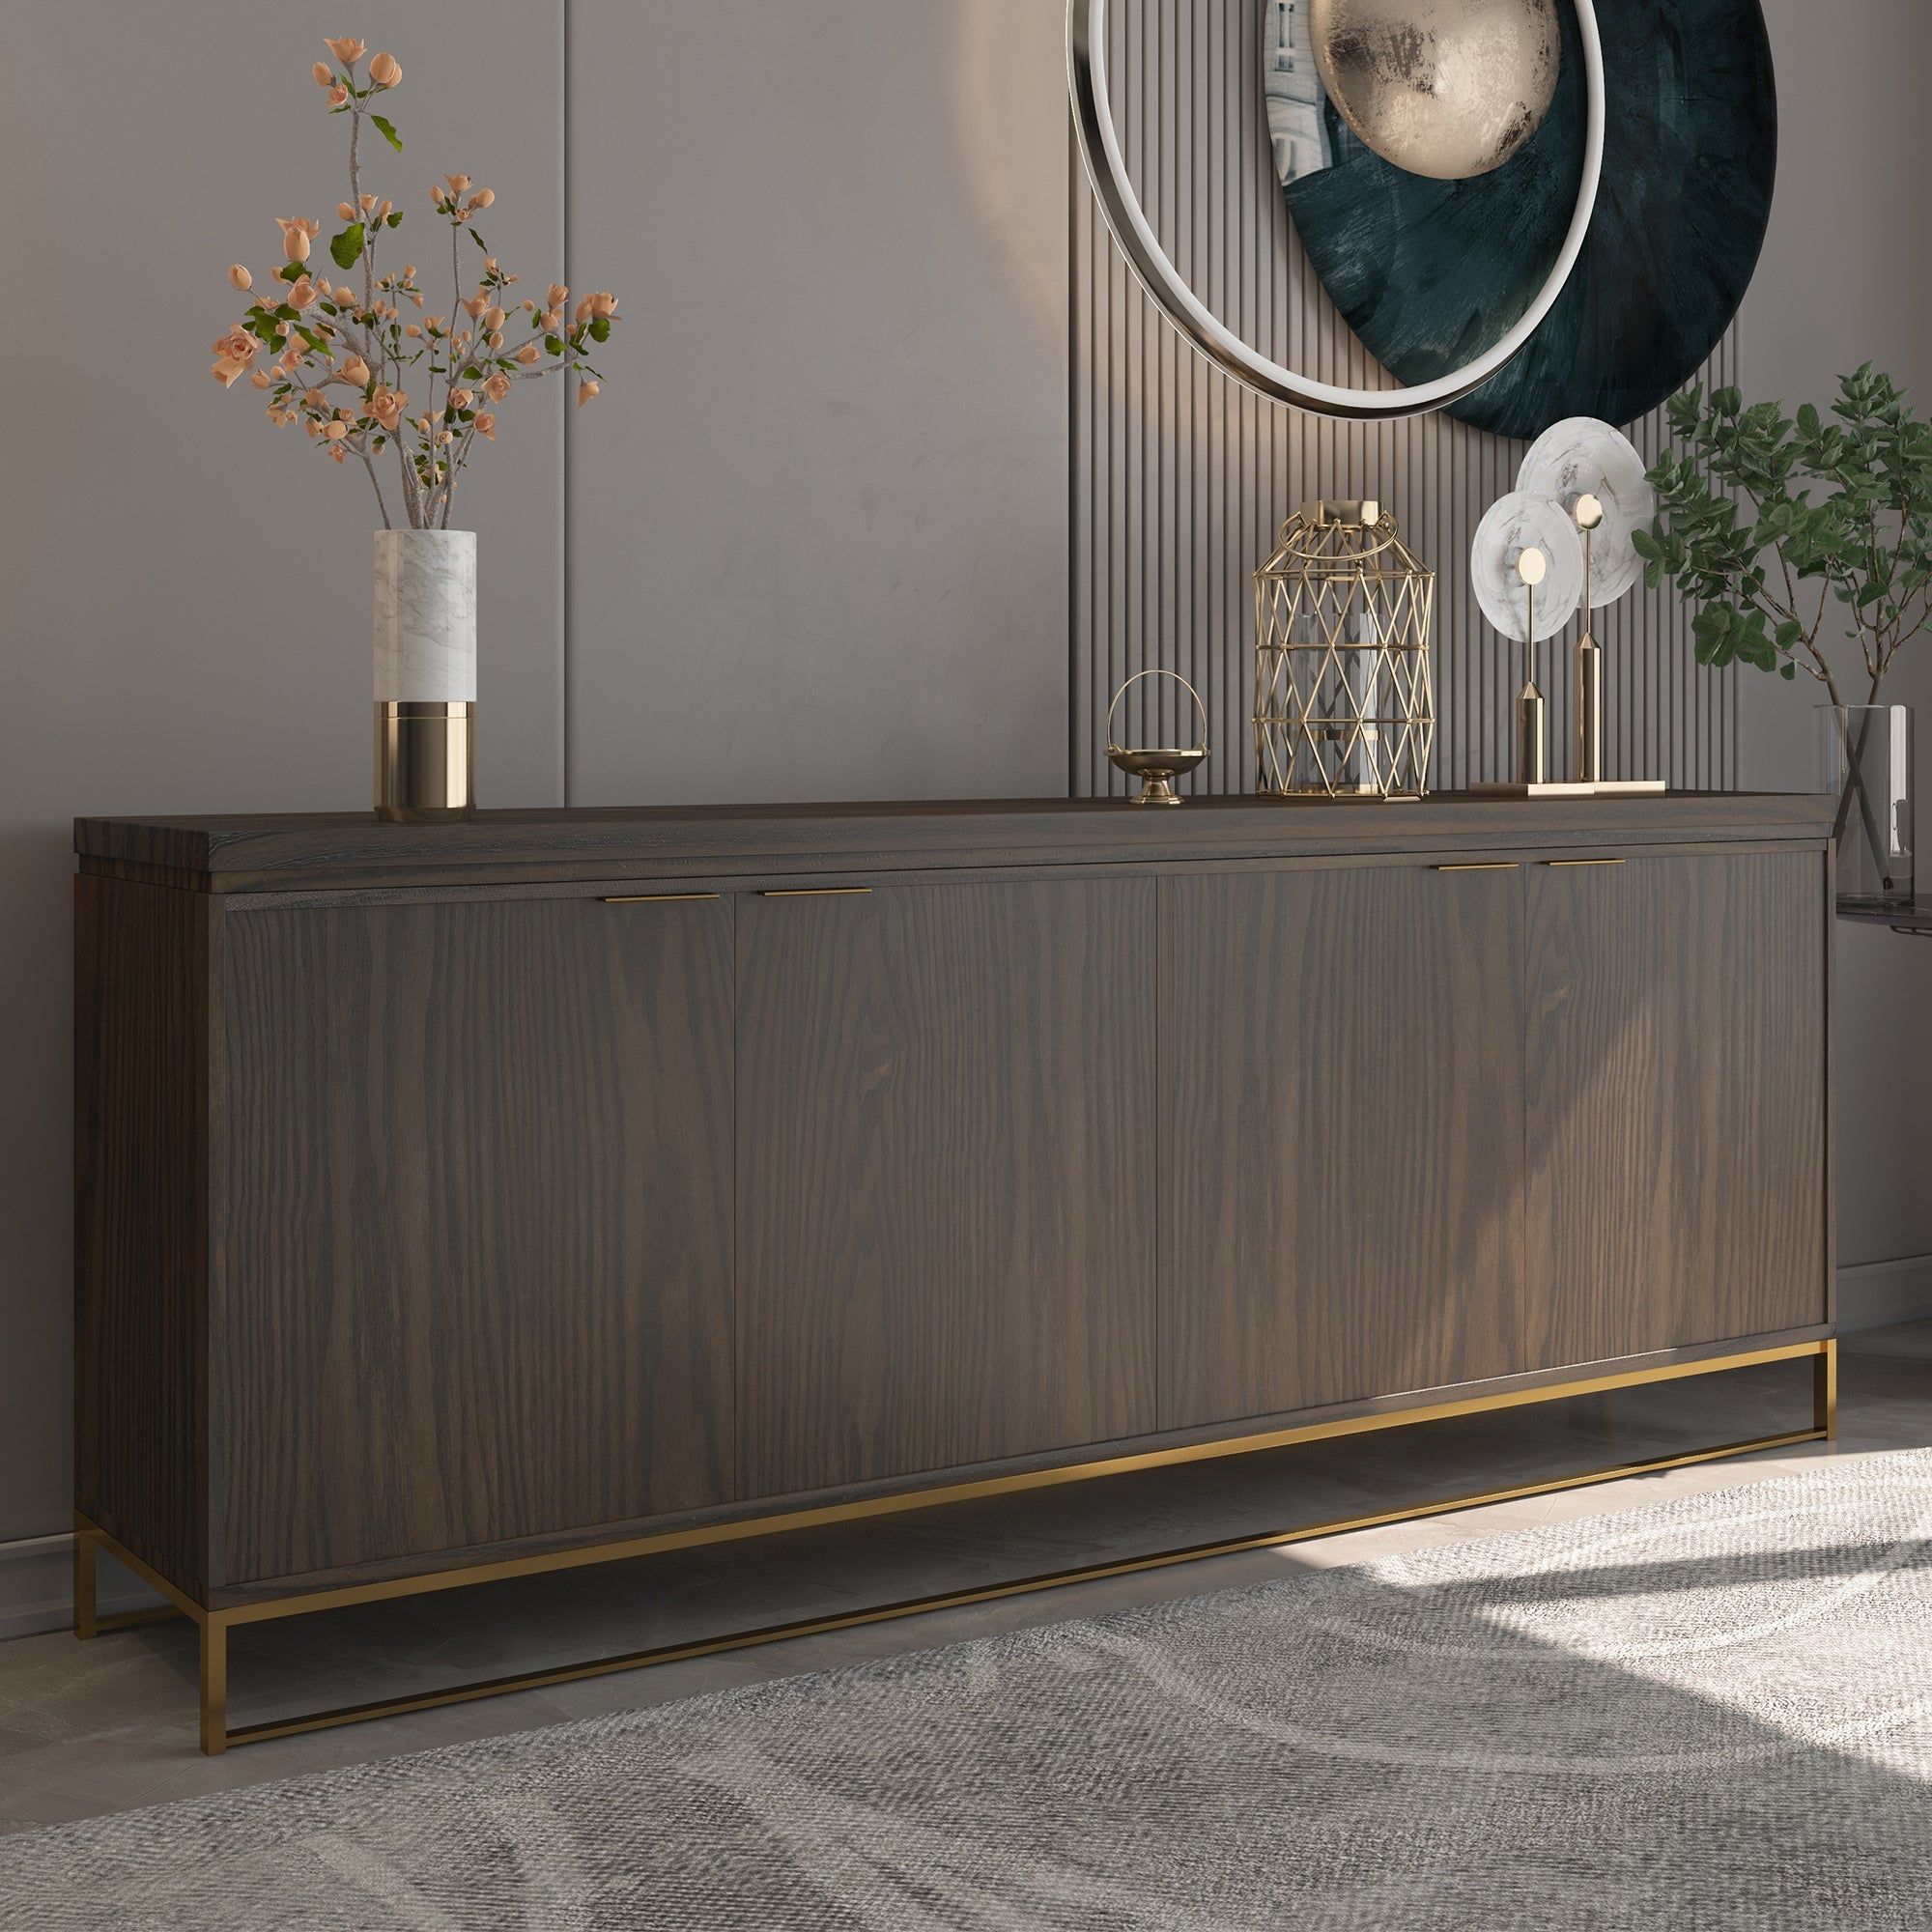 Modernizing Your Dining Room Decor with a Stylish Sideboard Cabinet